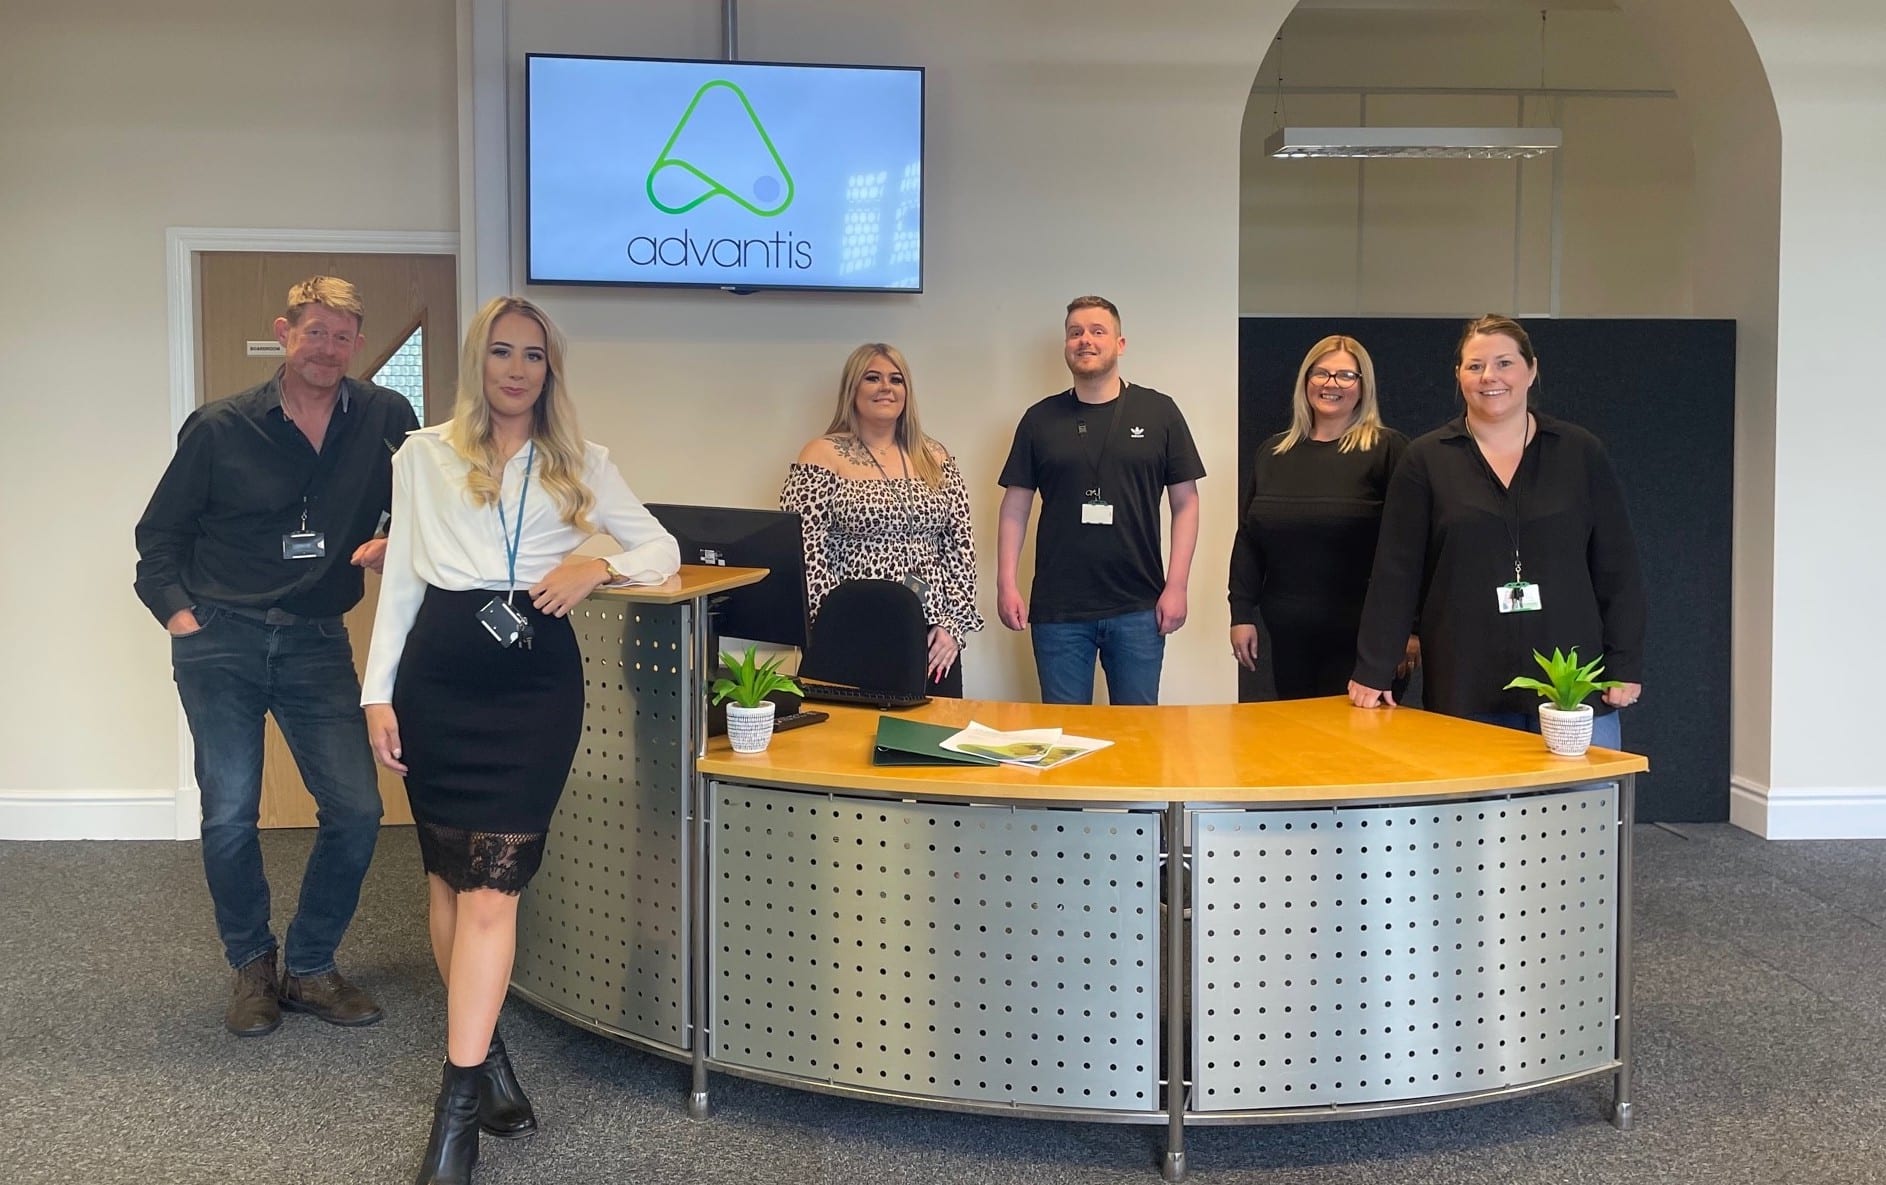 Richard-Walters-Head-of-Collection-Hayley-Duff-HR-Coordinator-Shannon-Biggs-Collections-Agent-Tom-McKeon-Administrator-Lindsay-Mitchell-Xpert-Recruitment-Naomi-Stoddard-Head-of-Back-Office-Operations